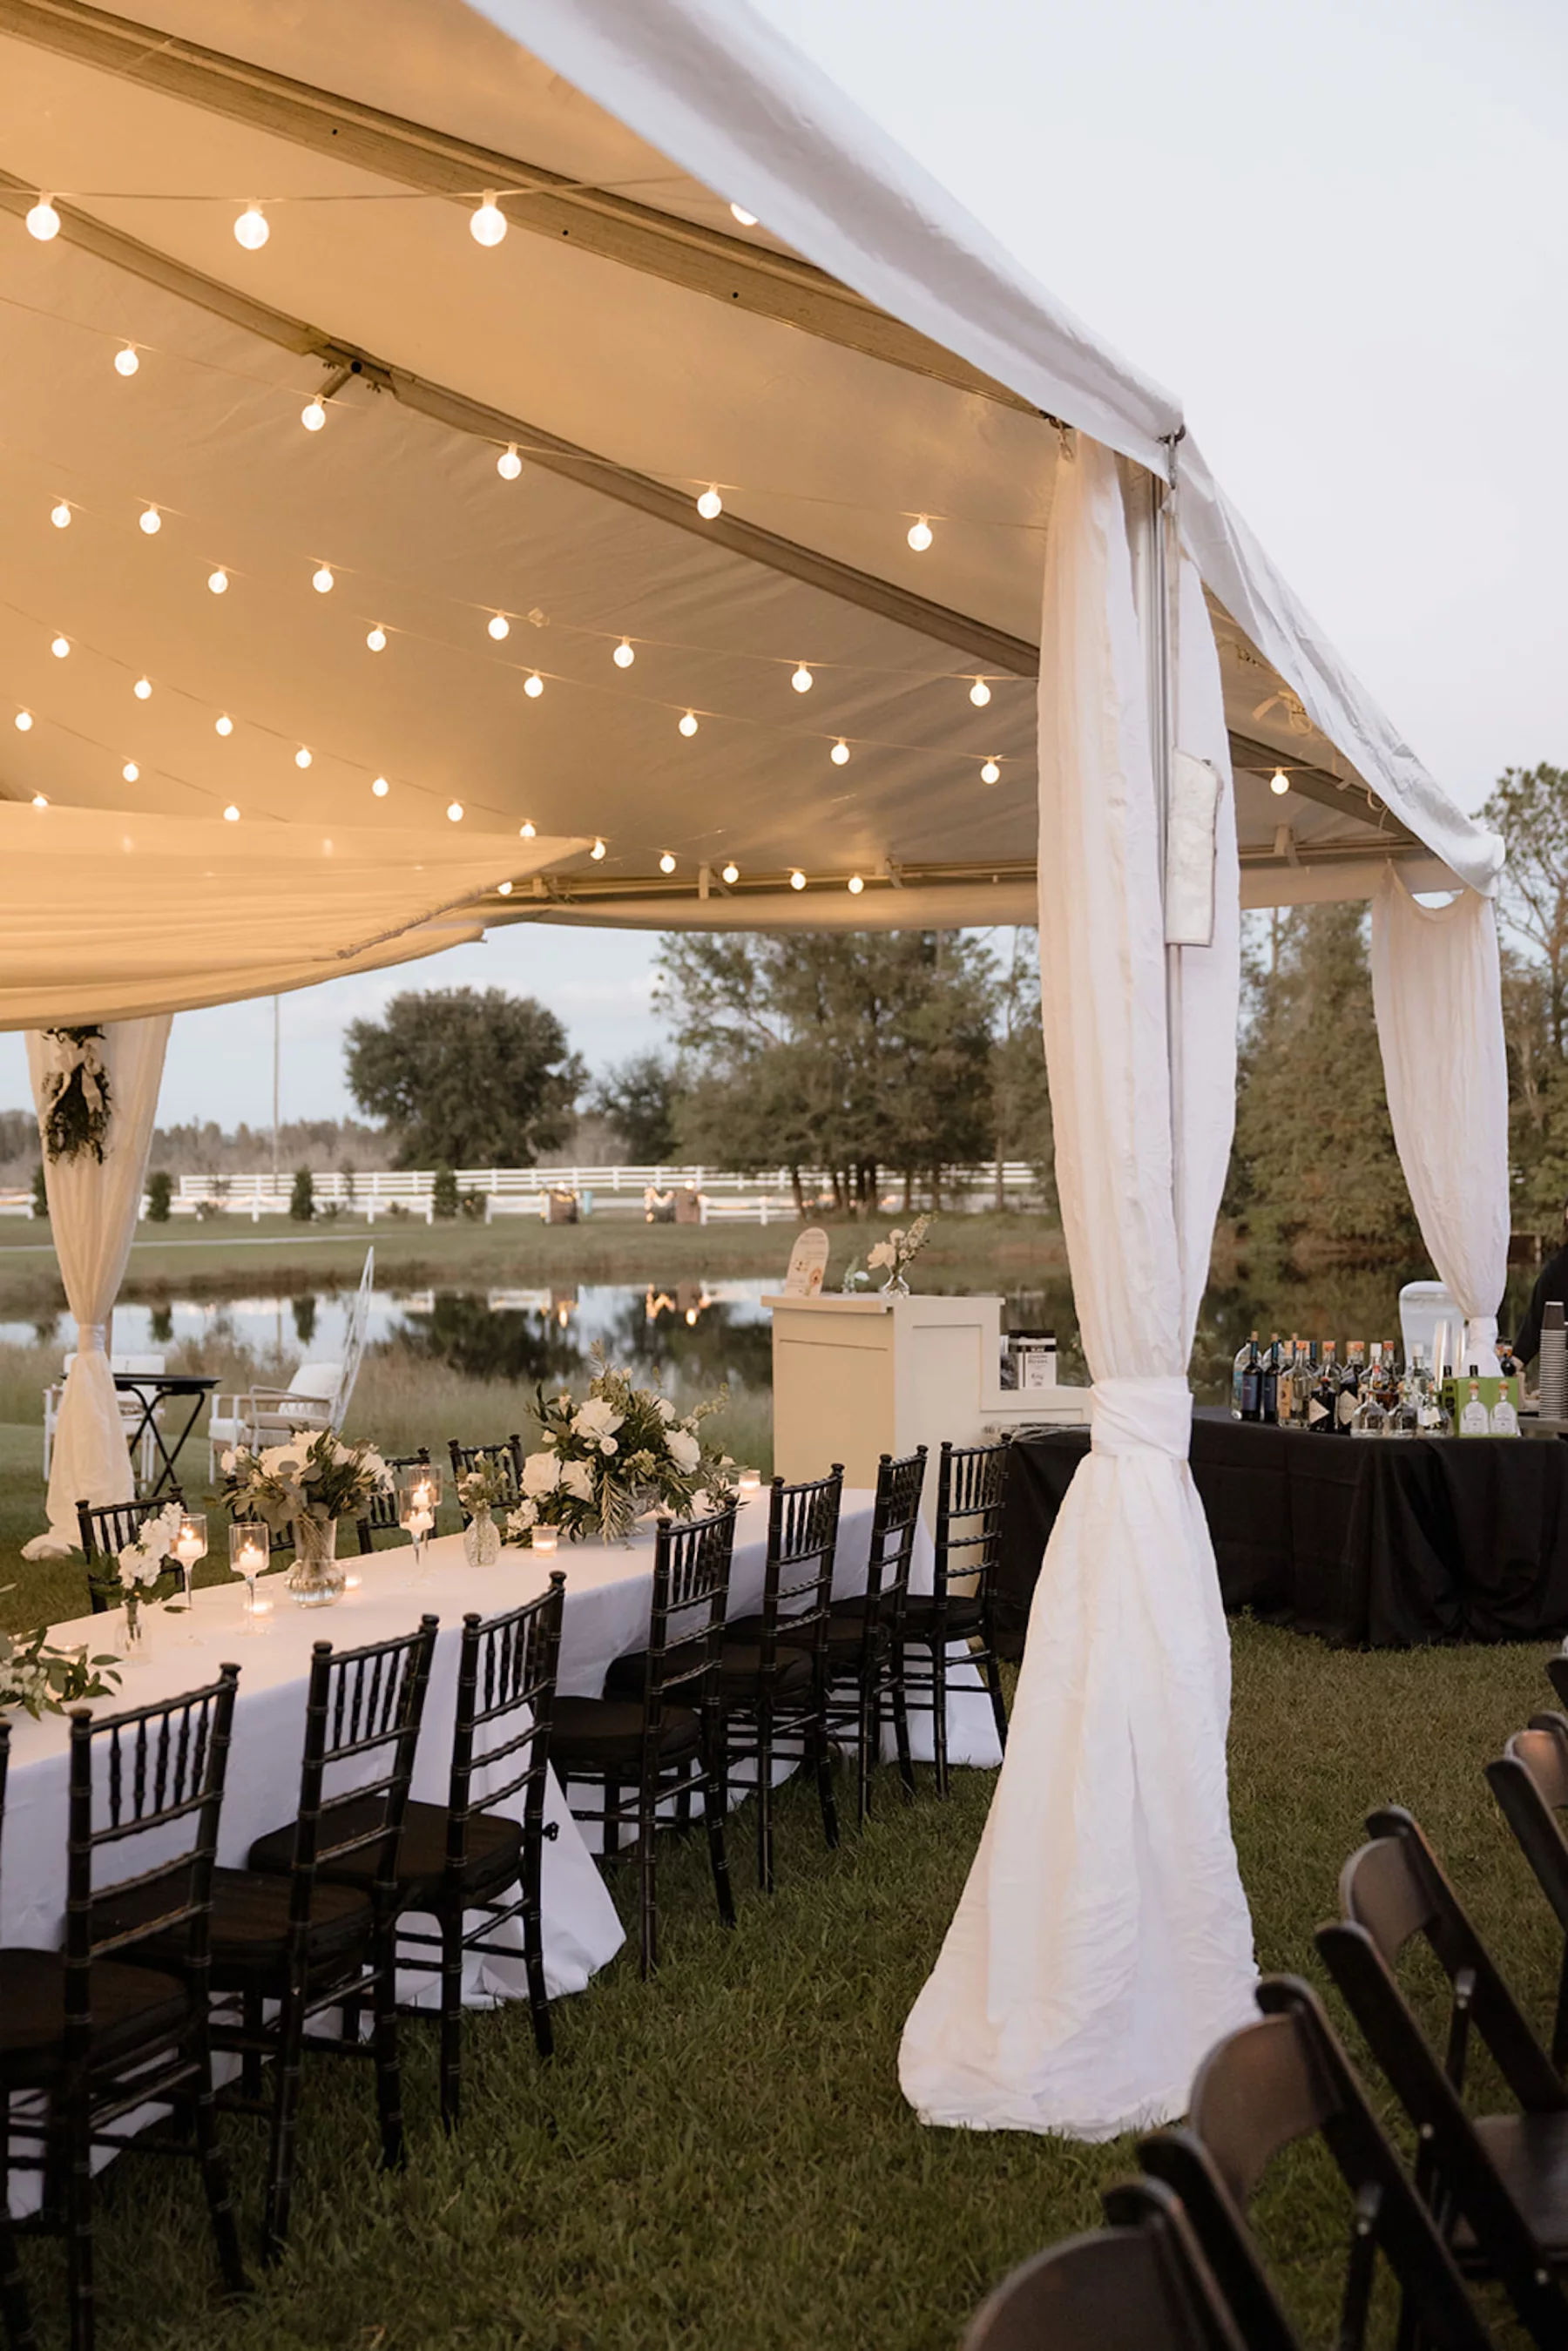 Timeless White and Black Tented Fall Wedding Reception Inspiration | Market Lights and Drapery, Long Feasting Tables and Greenery Garland Centerpiece Decor Ideas